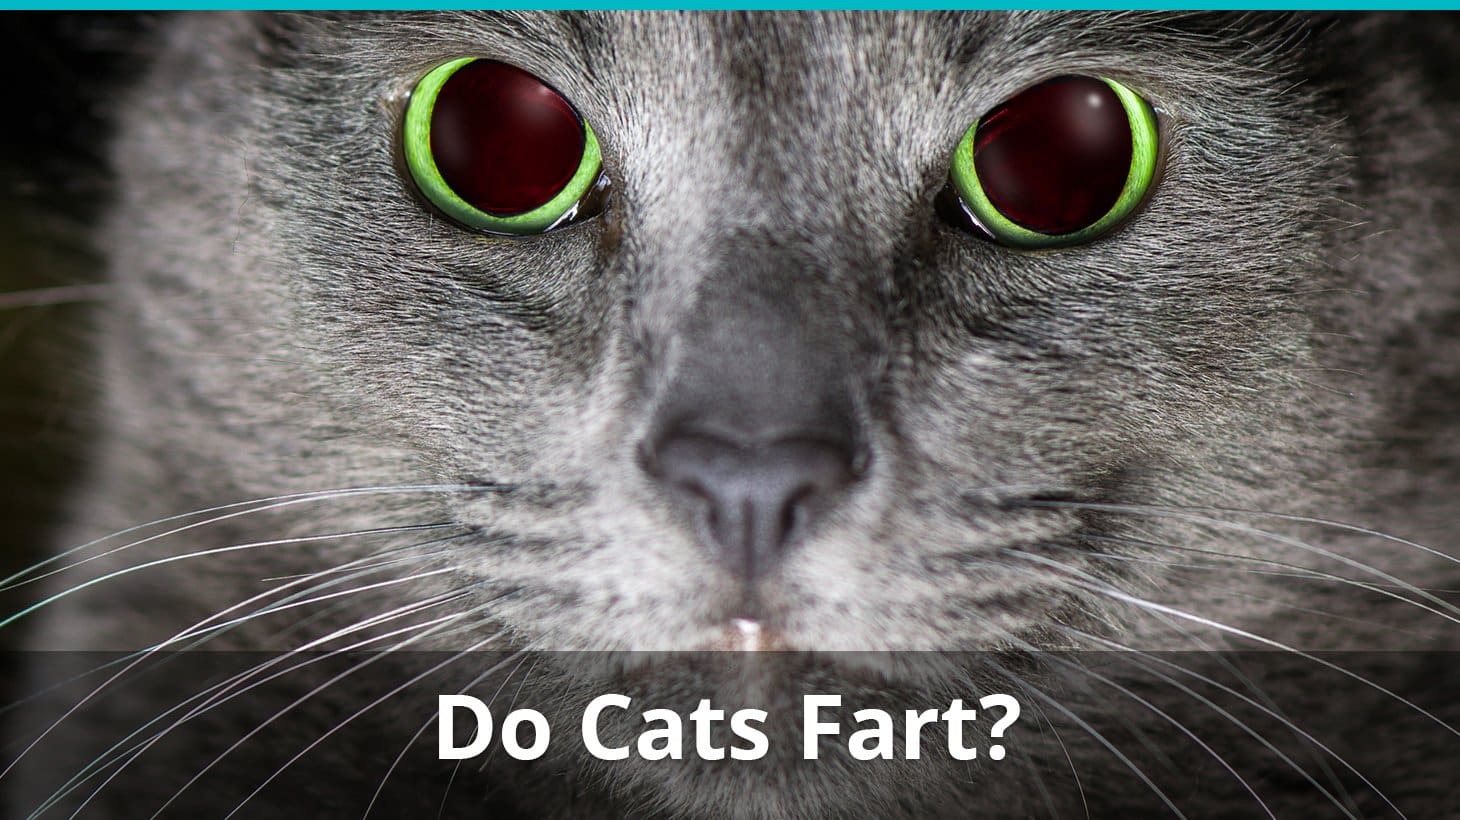 Can Cats Fart, Pass Gas, Flatulate, Or Let One Rip?